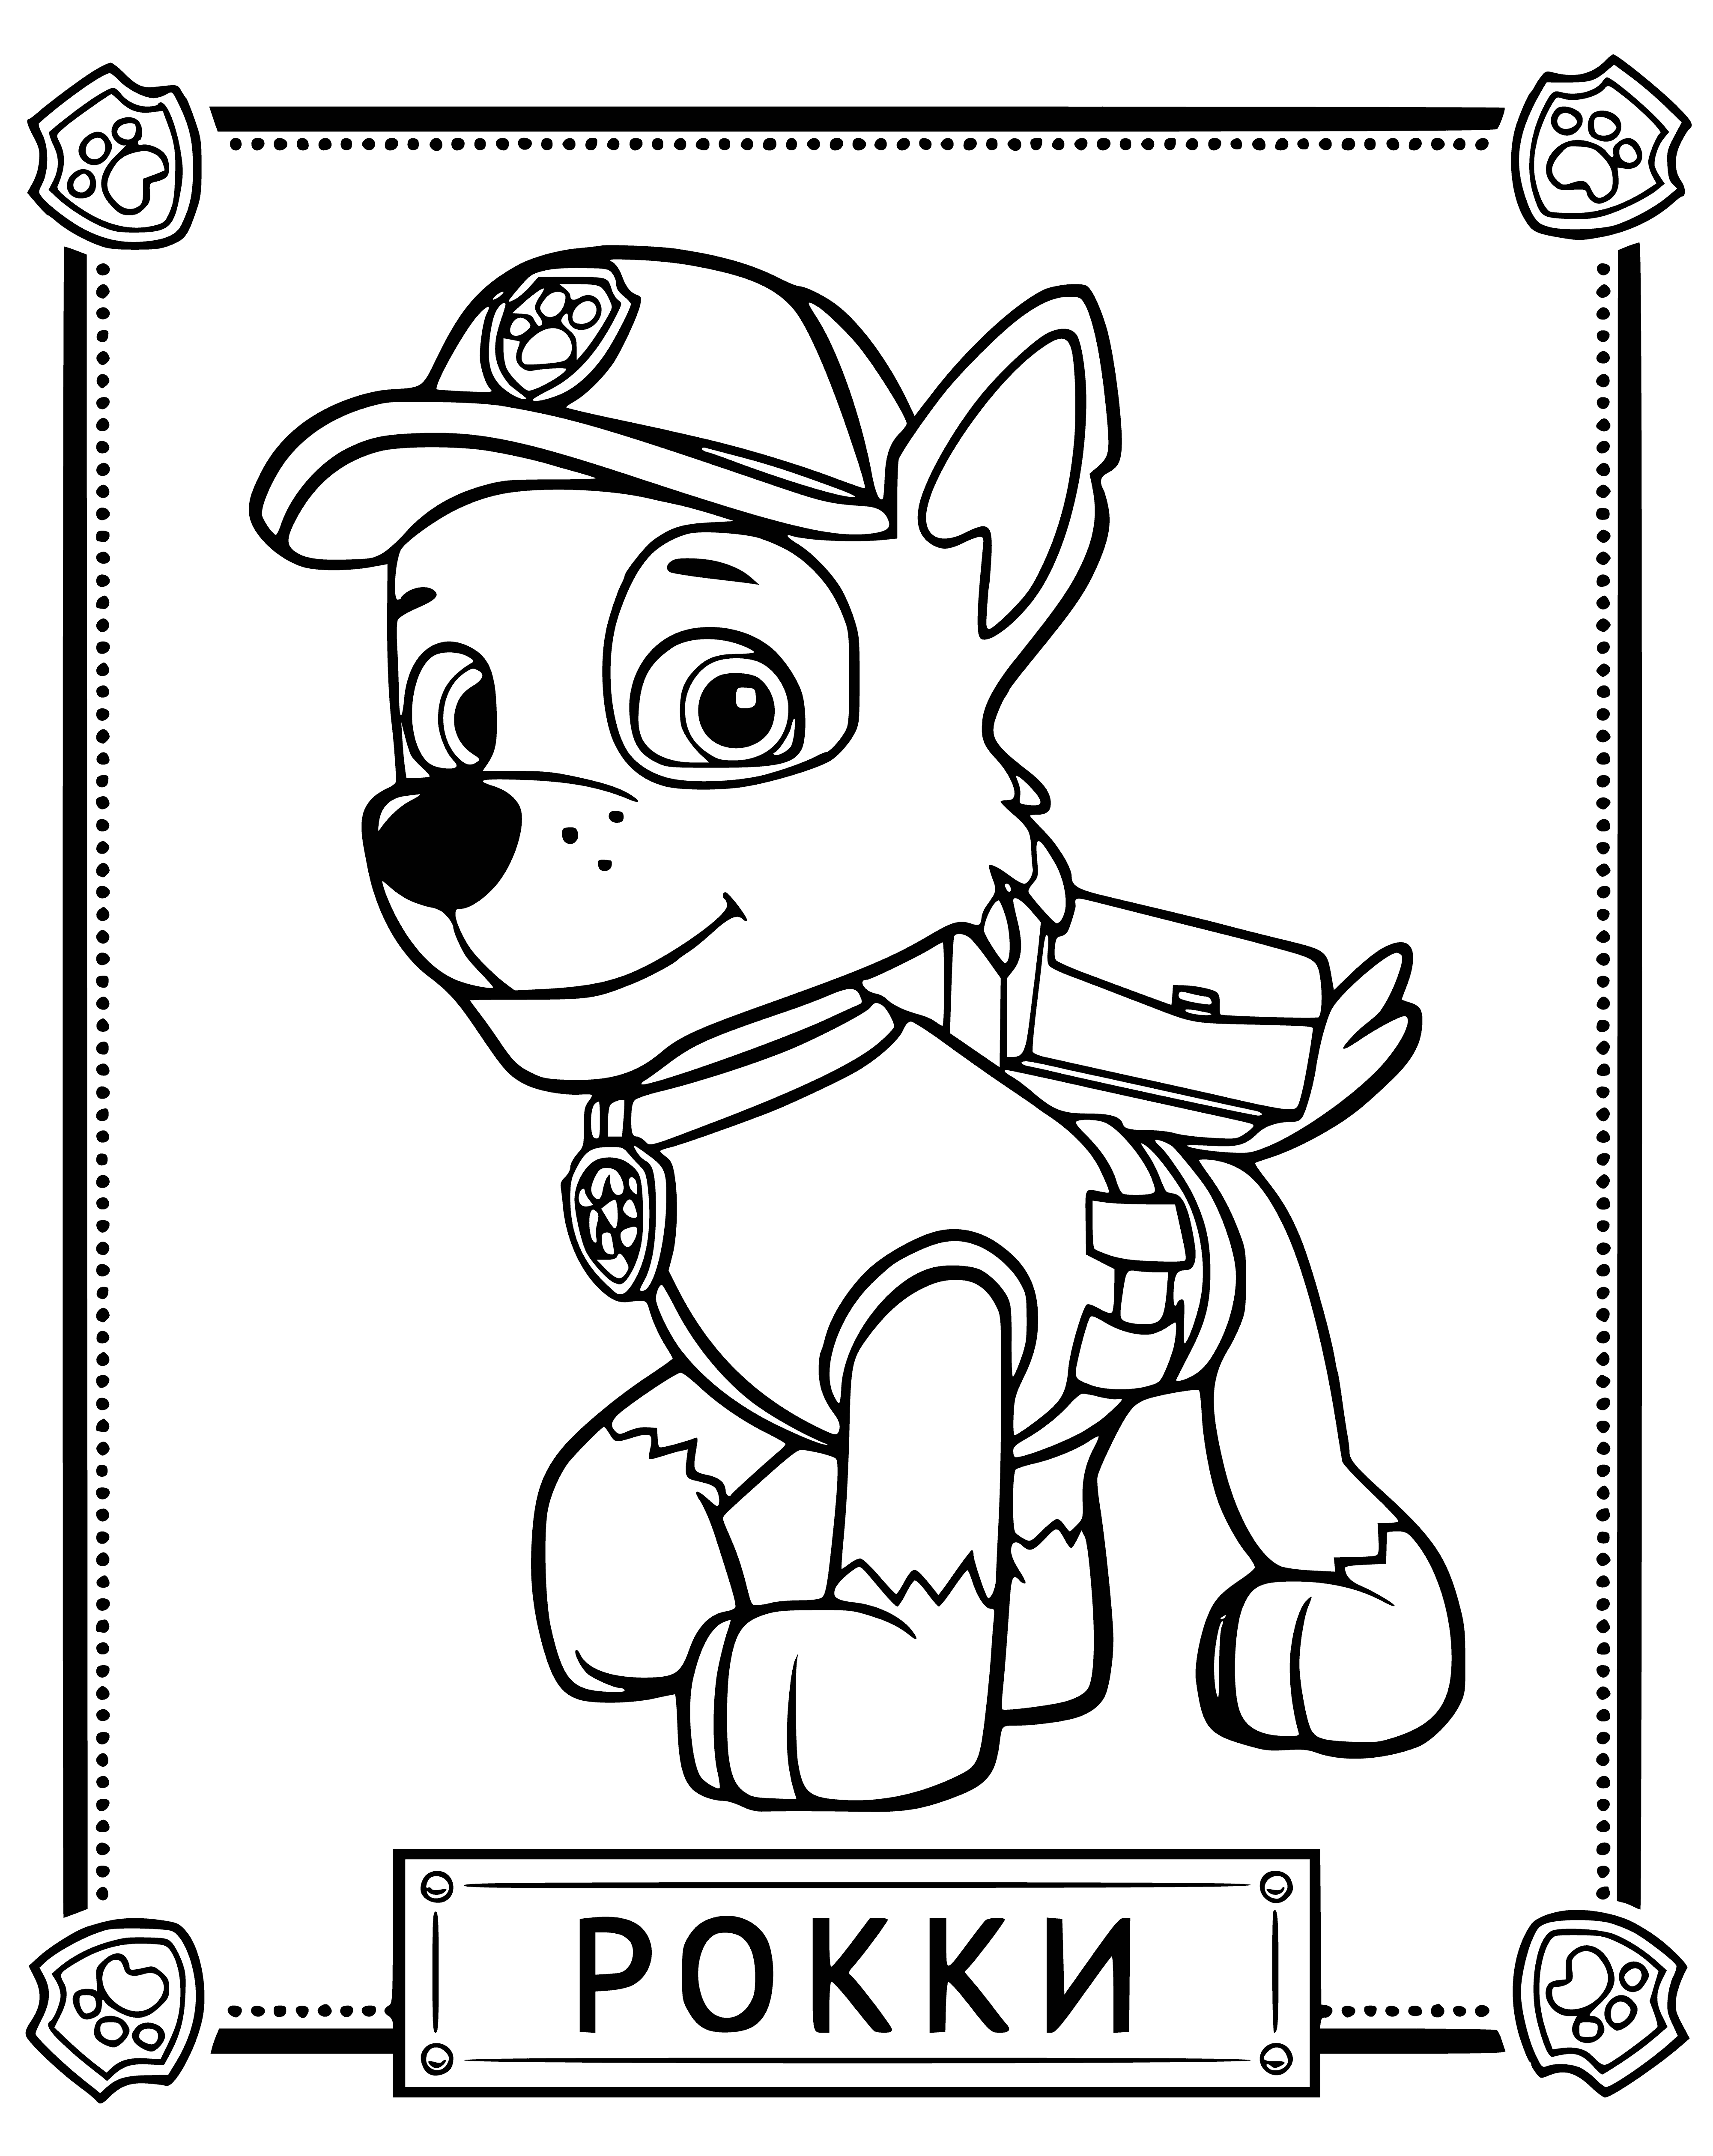 coloring page: Rocky wears a blue collared shirt and carries a large backpack. He stands near tools and a fire hydrant. #adorablepup